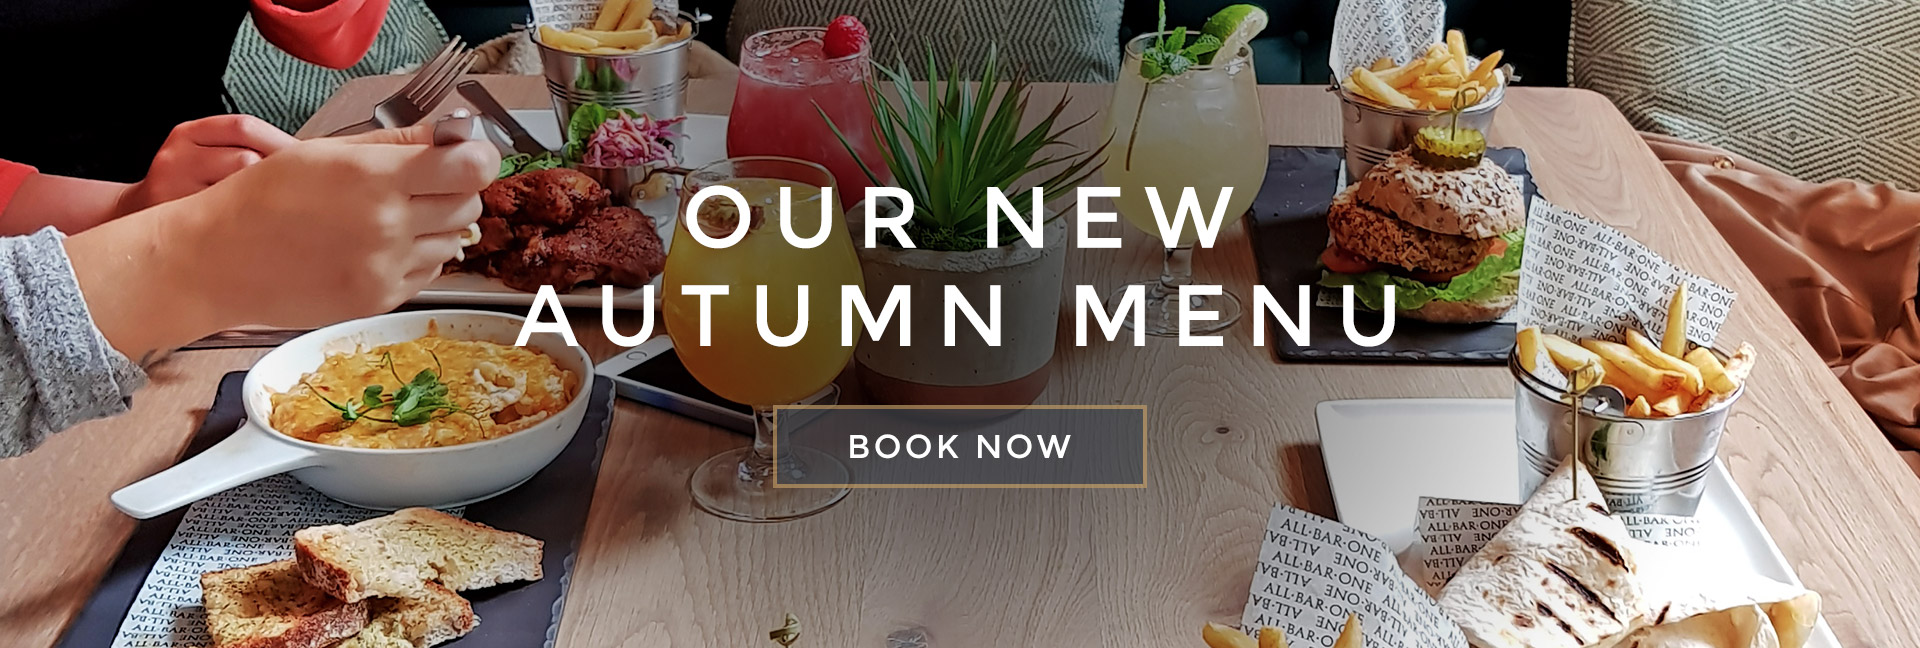 Our new Autumn menu at All Bar One Windsor - Book now